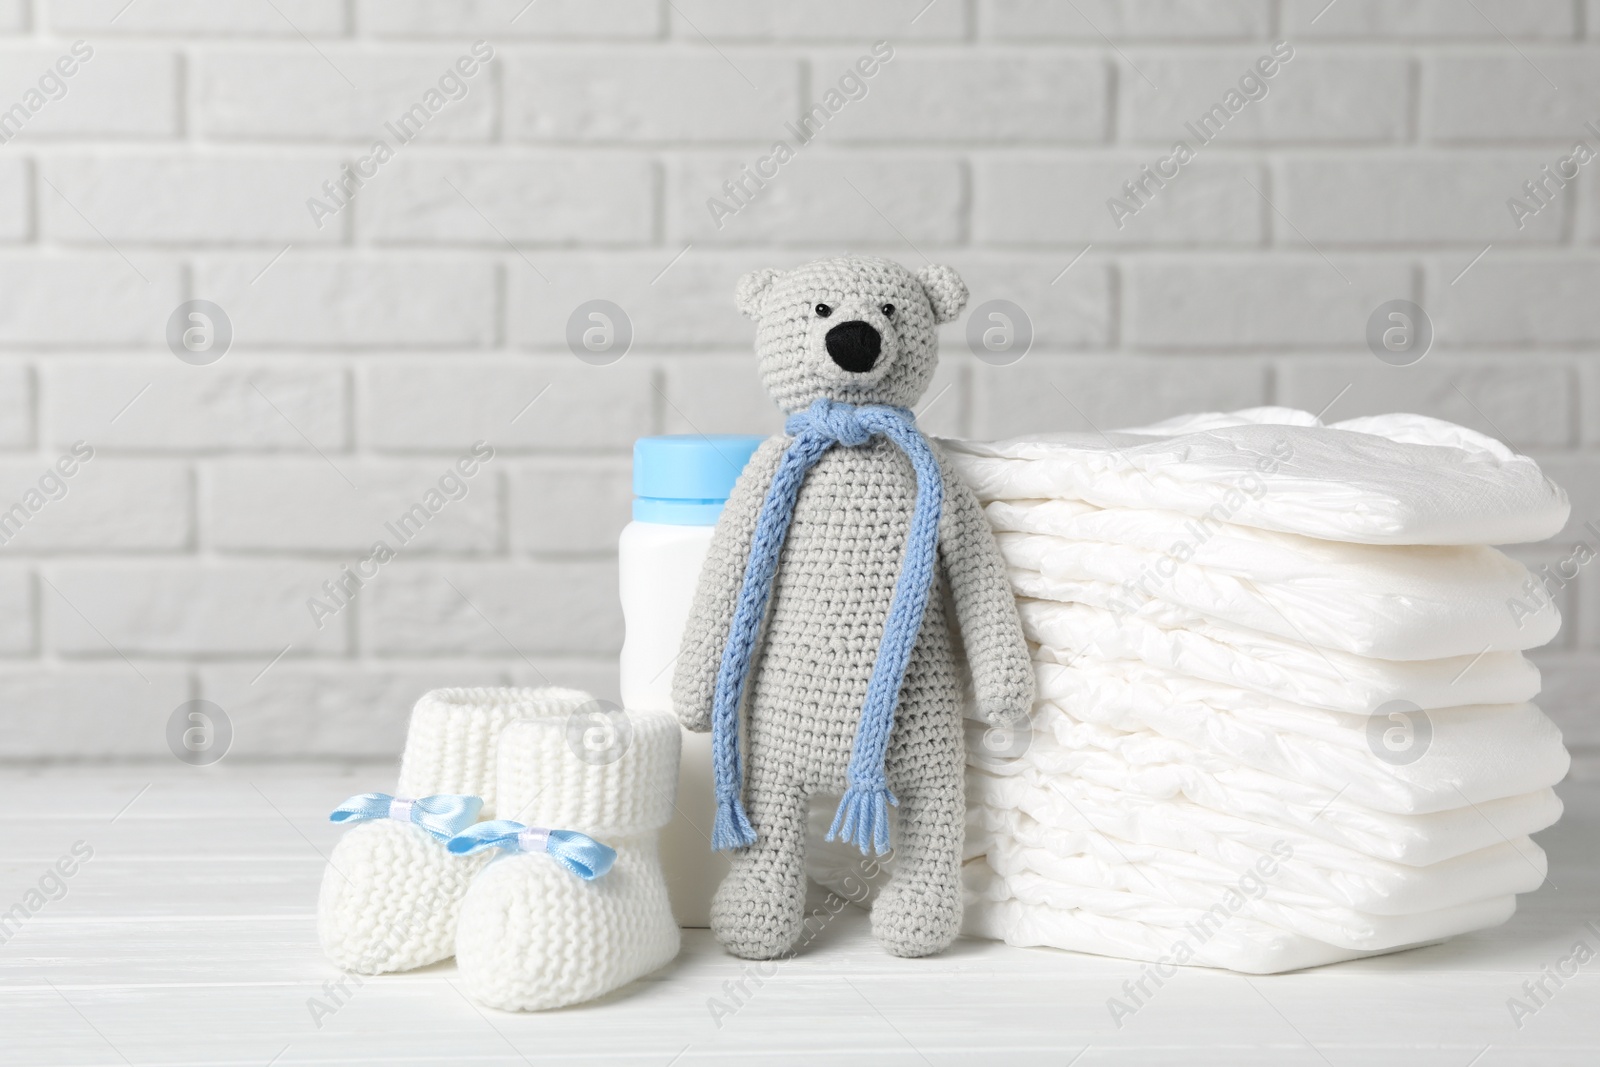 Photo of Baby diapers, toy bear, booties and bottle on wooden table against white brick wall